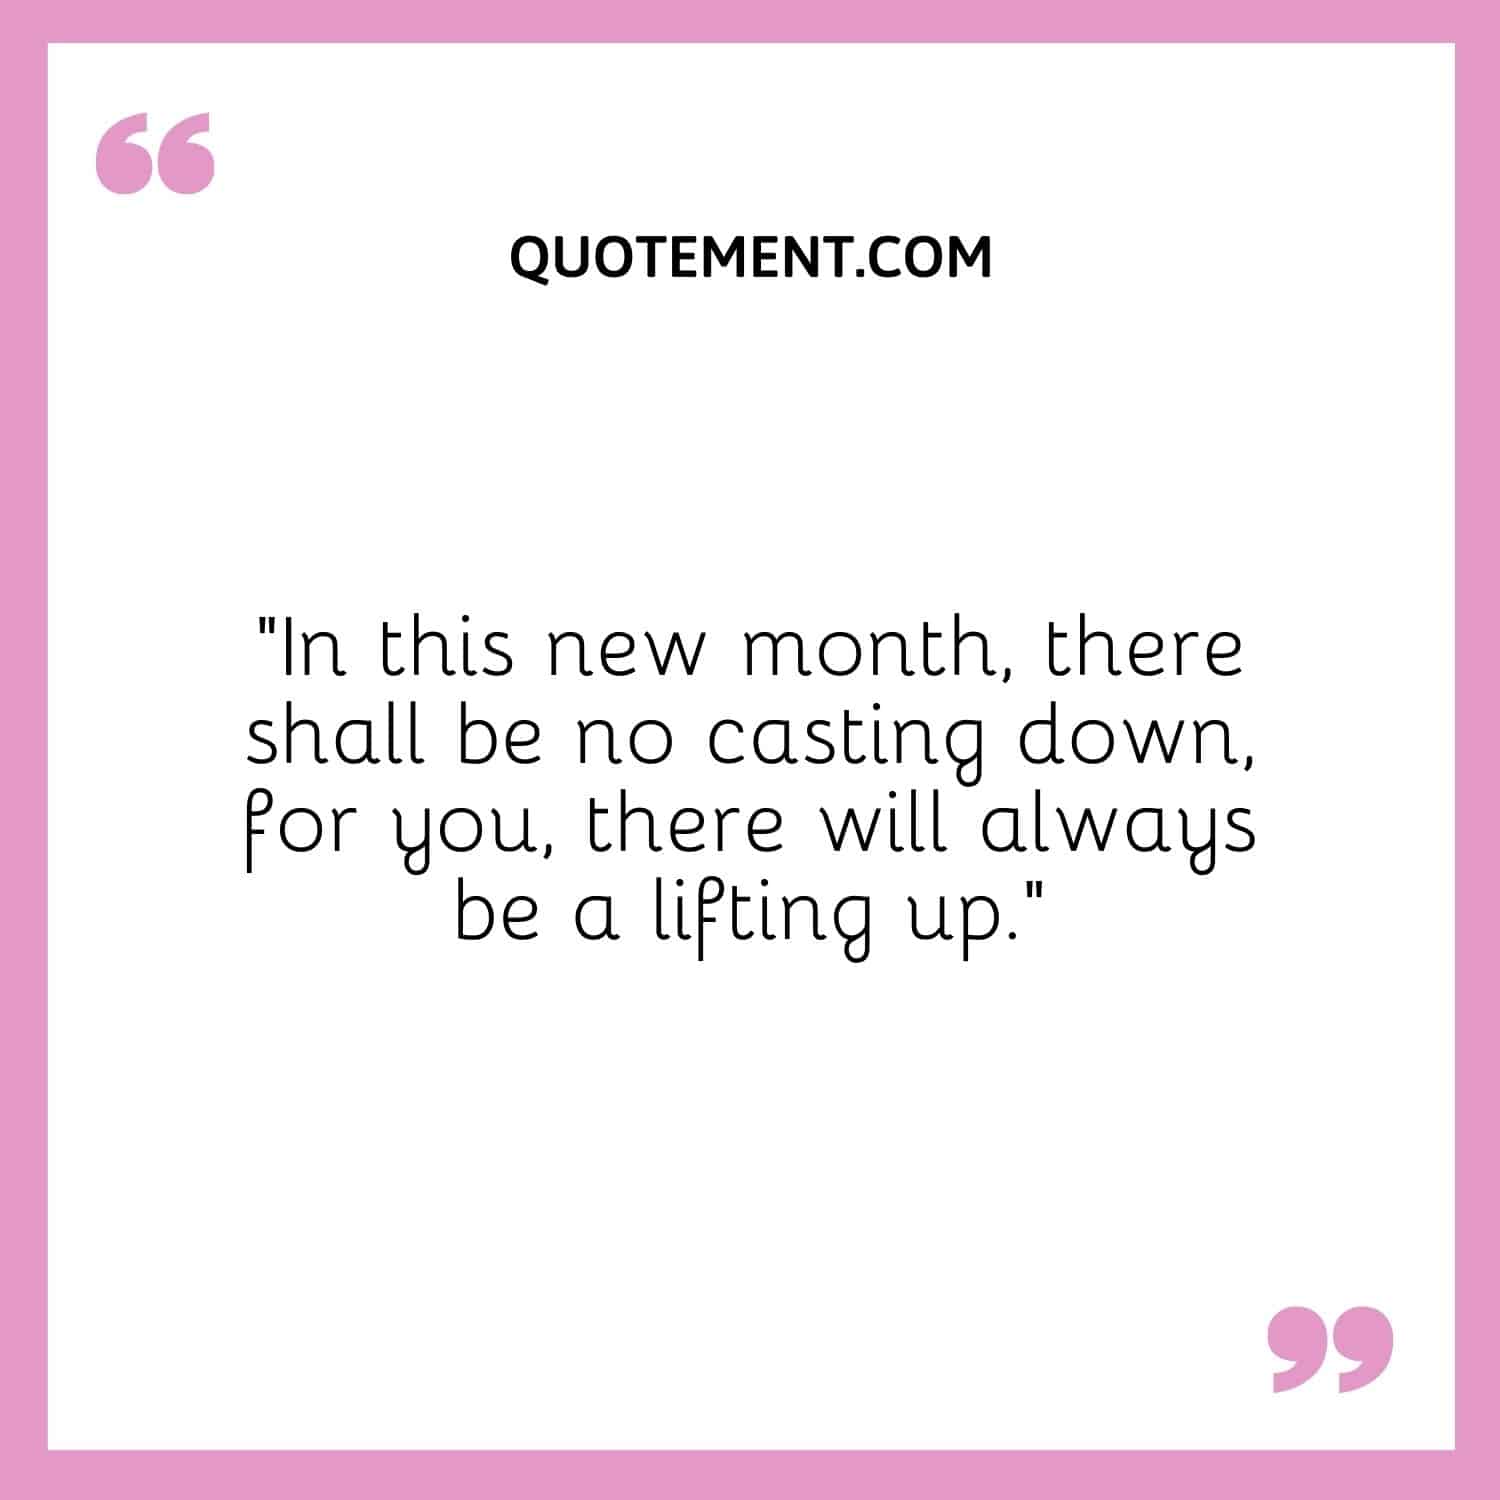 In this new month, there shall be no casting down, for you